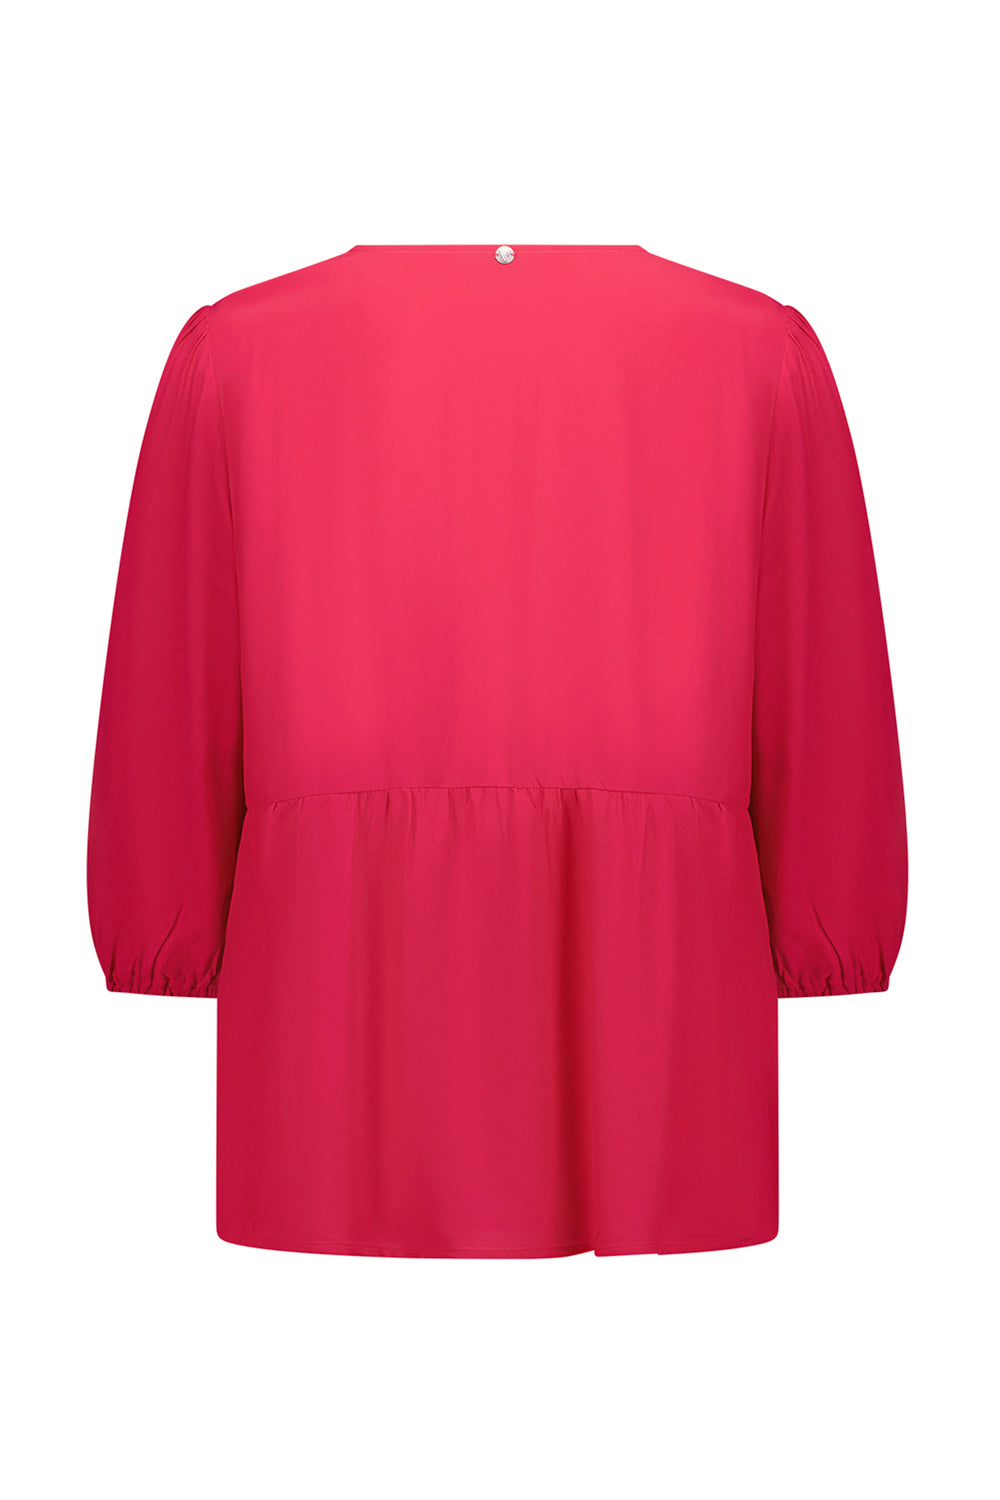 Scout Top - Bright Pink - Top VERGE